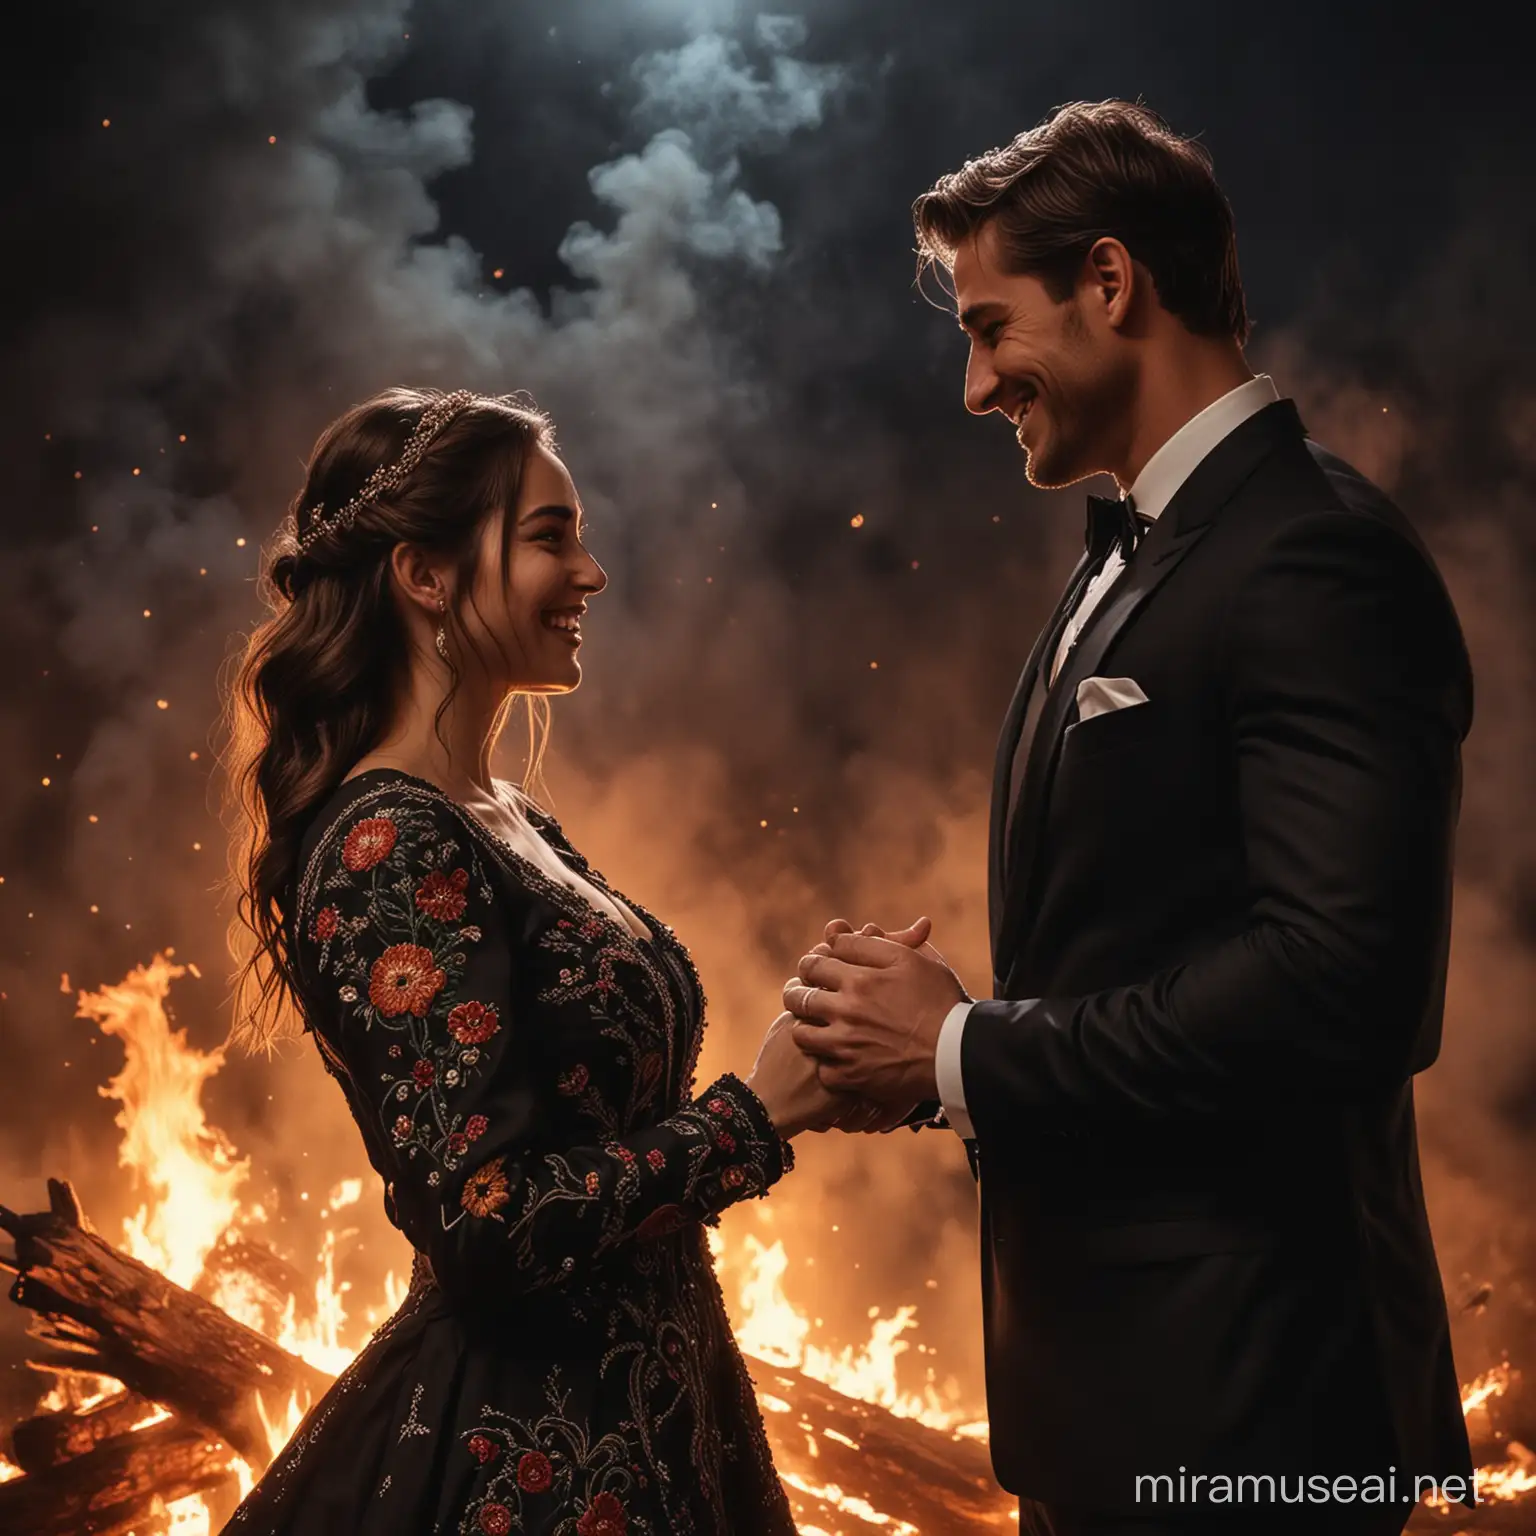 Dark night, big fire on the background. Man and woman look at each other. The man holds her hand and smiles. It's their first meeting. She doesn't smile. Man wears dark suit with embroidery. It's look like magical dreams